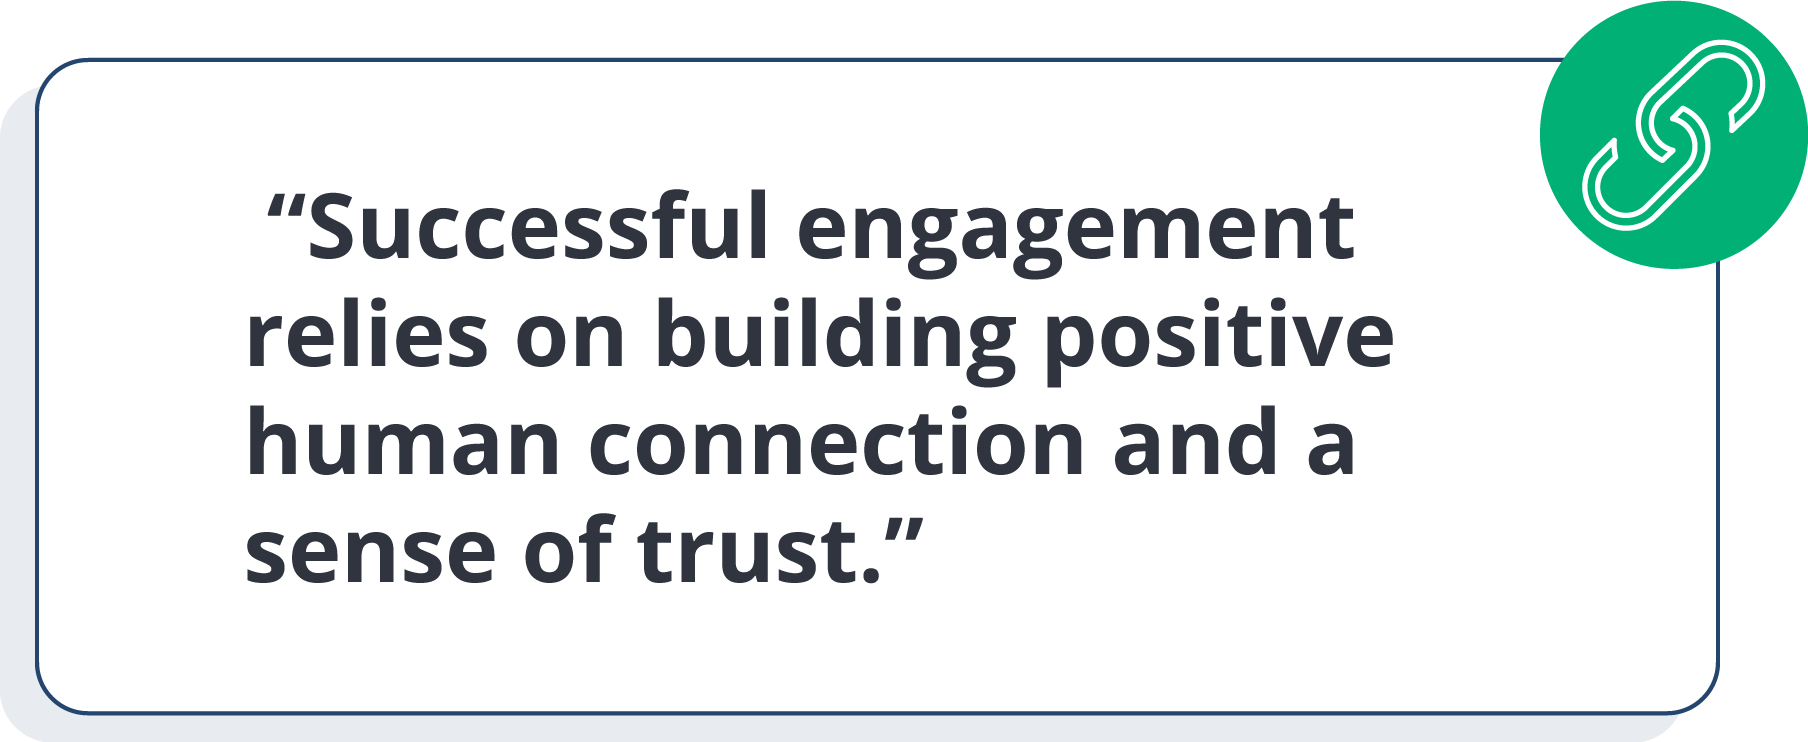 Successful engagement relies on building positive human connection and a sense of trust.